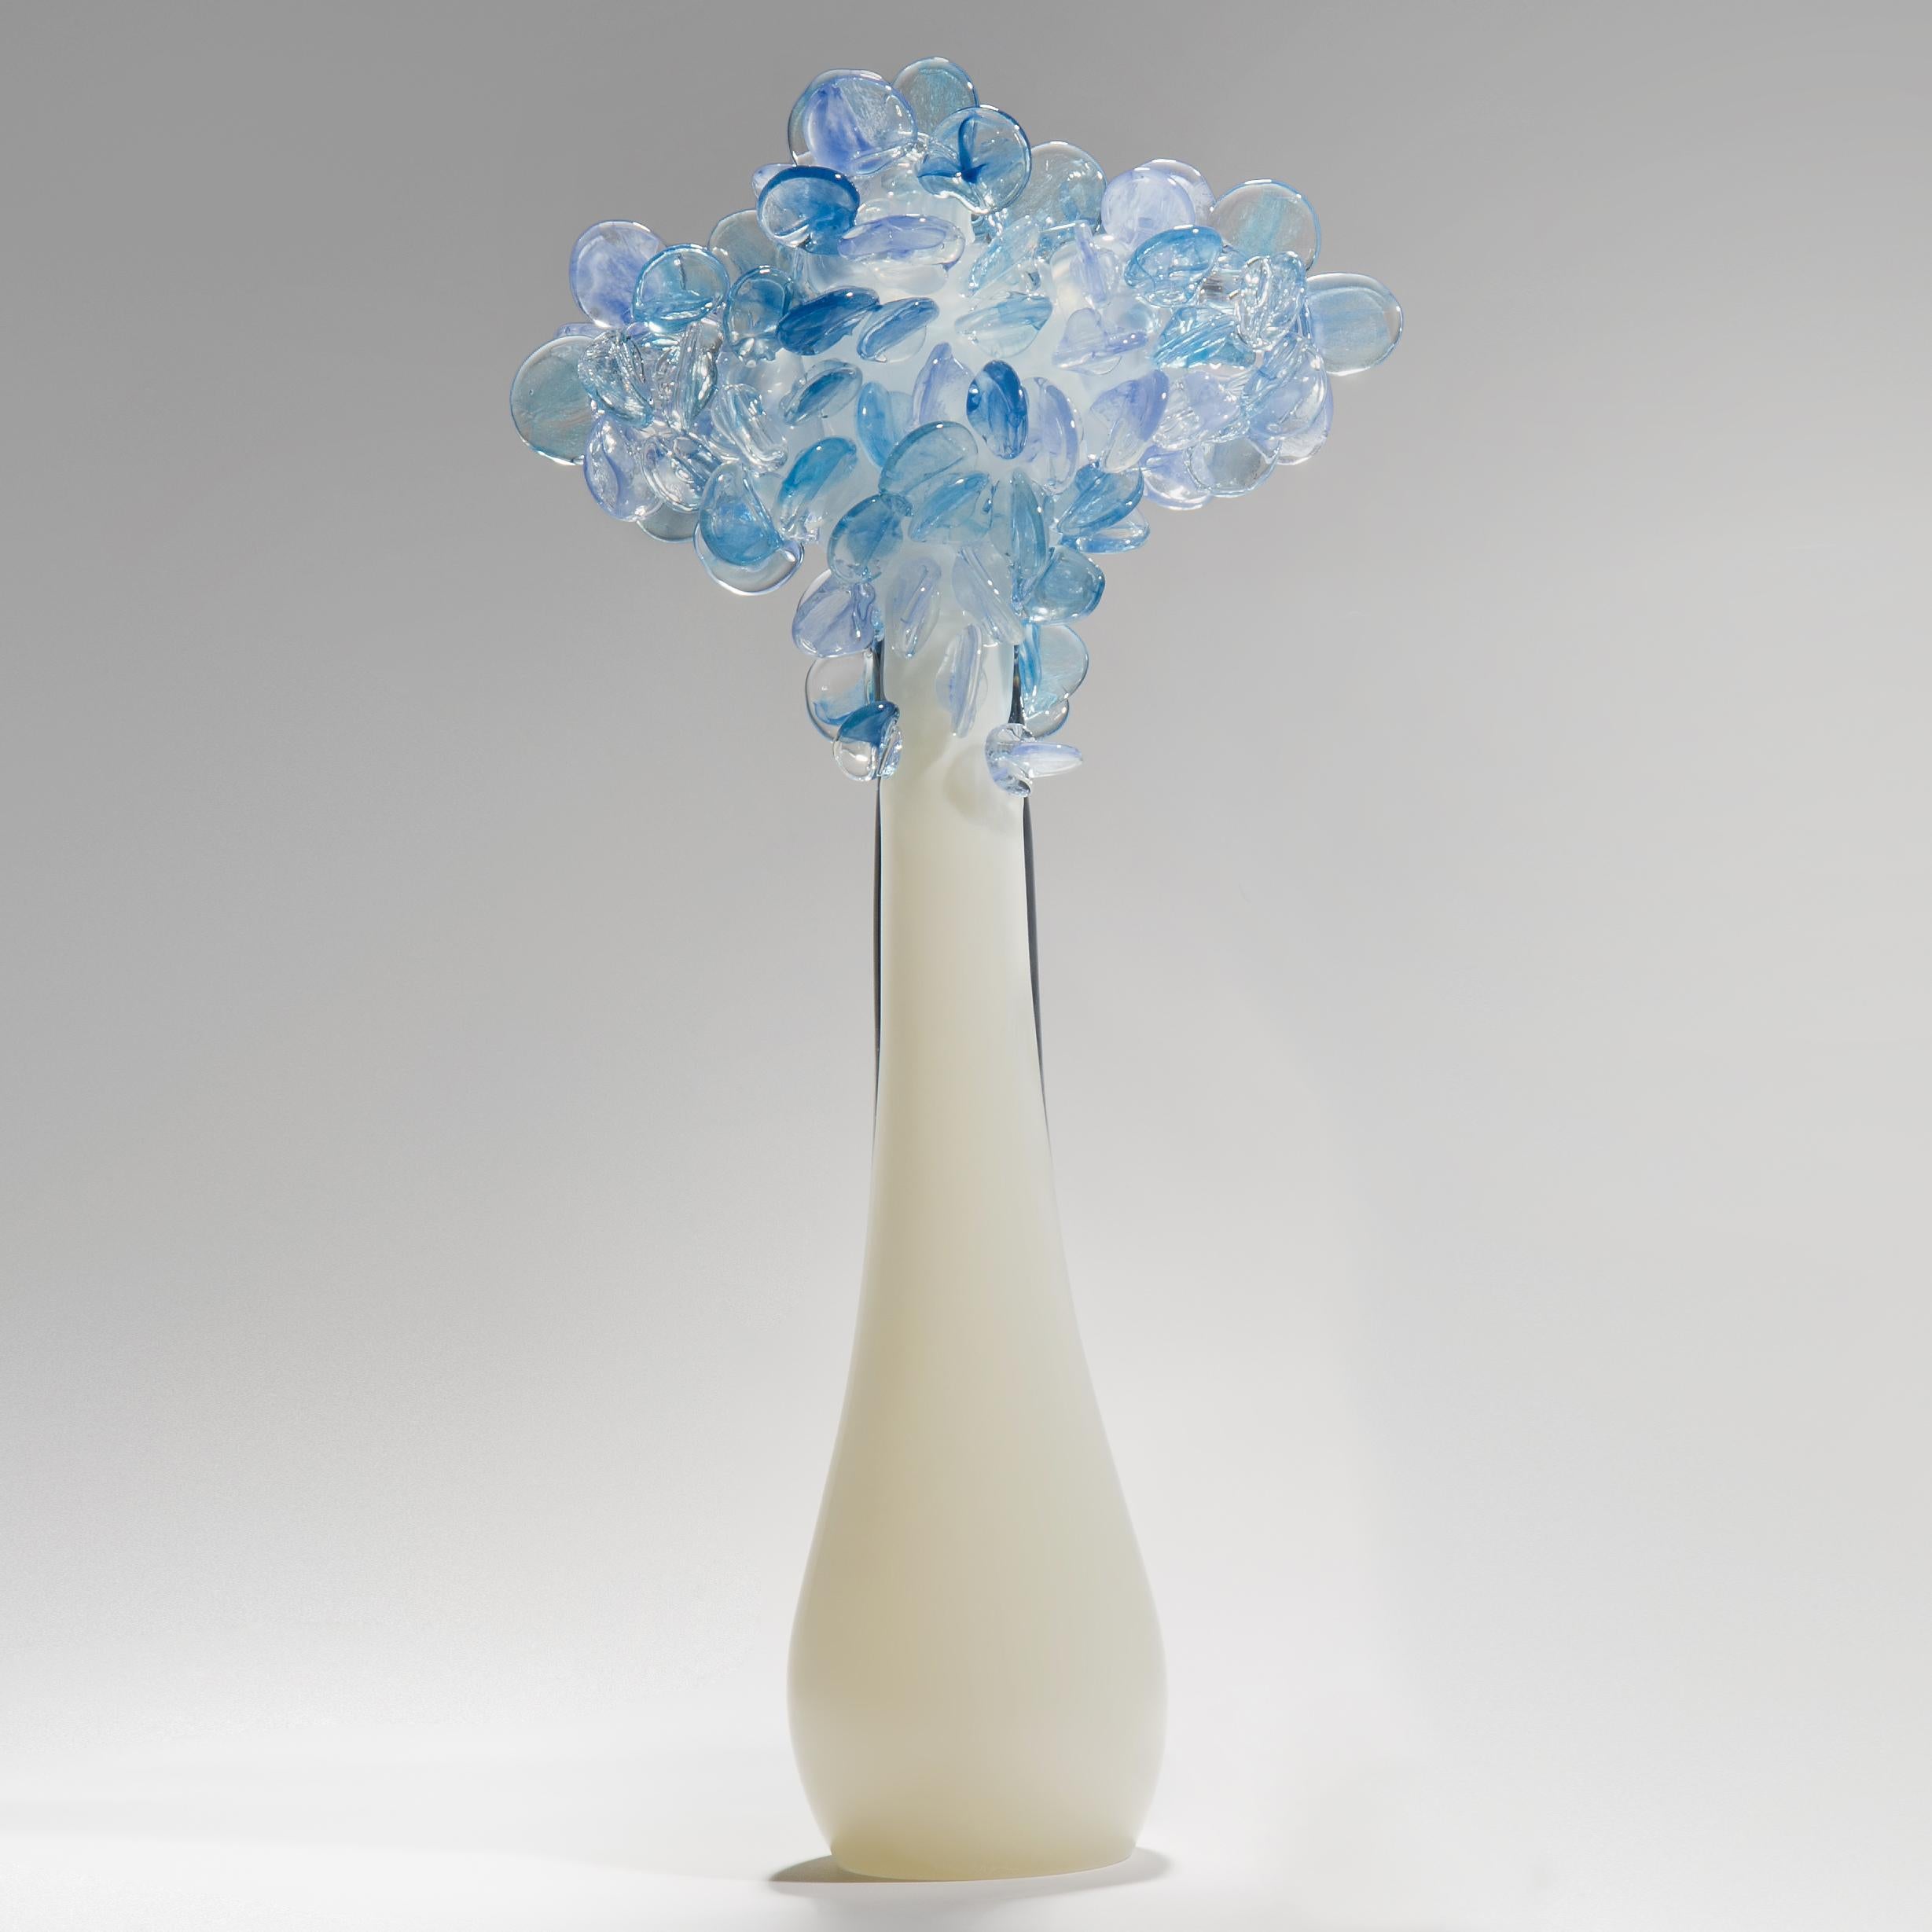 Enchanted dawn in tall blue, is a unique glass tree sculpture by the British artist Louis Thompson. The initial tree trunk form has been hand blown in clear and ivory/alabaster colored glass. The top has been covered in free-hand-sculpted leaves,